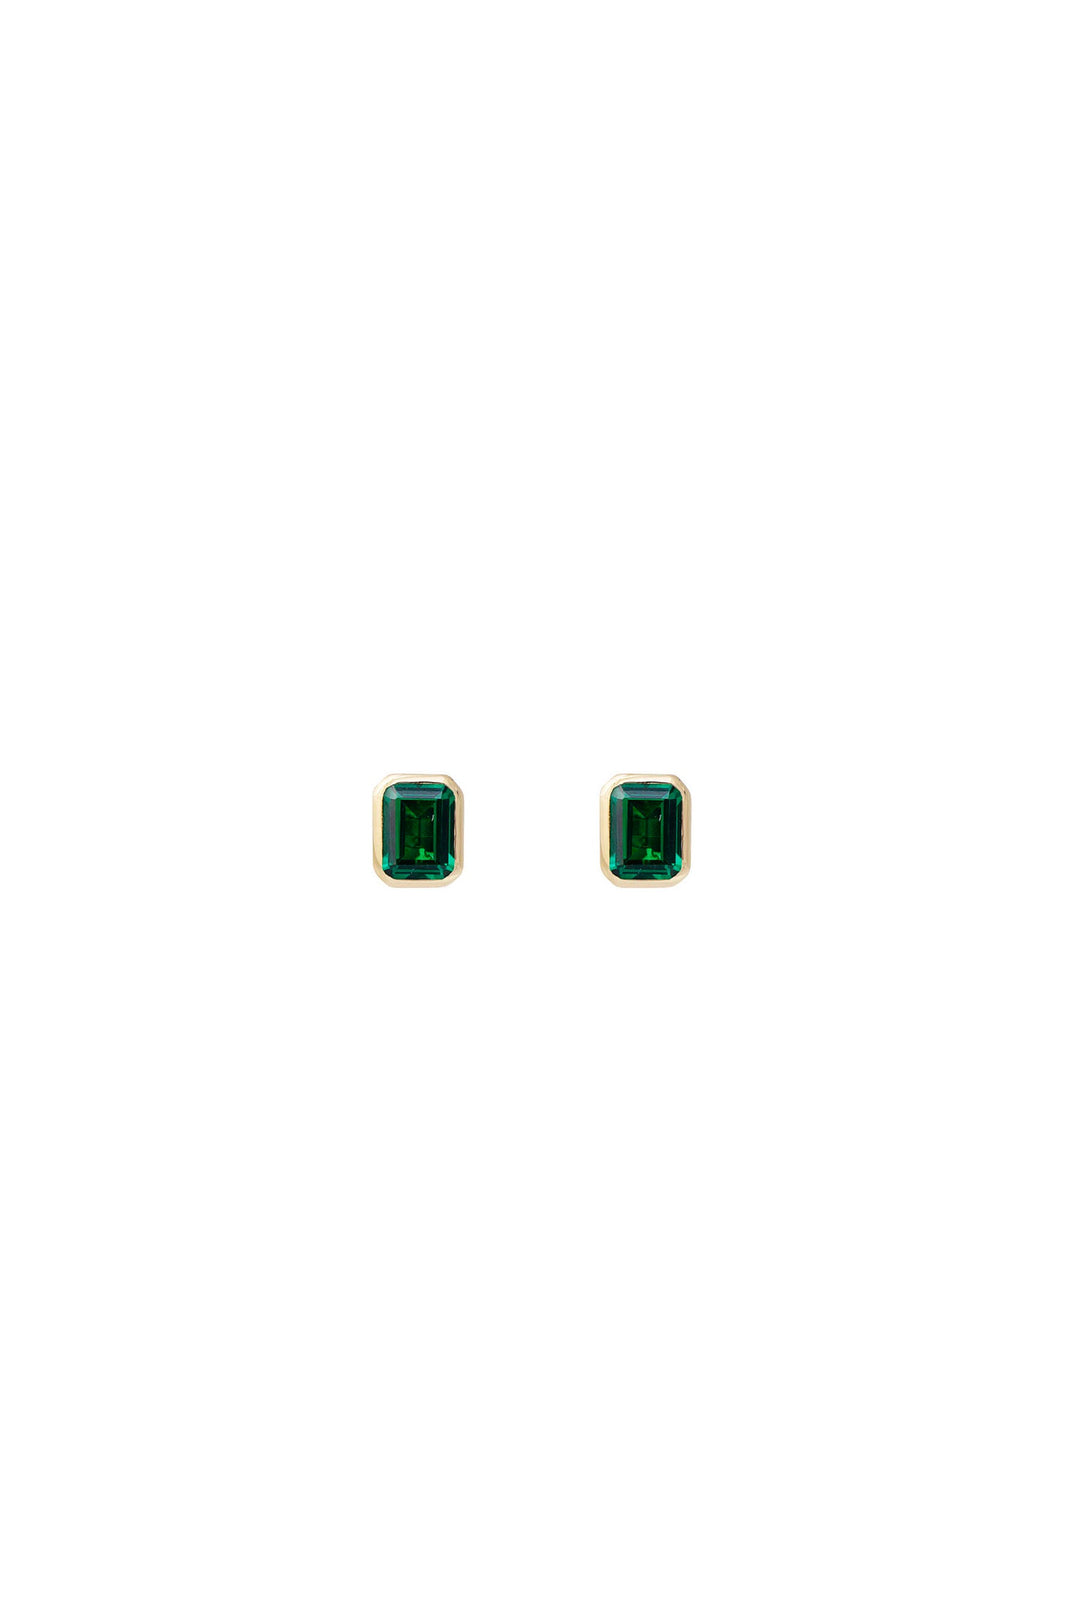 Fairley Cocktail Studs - Green